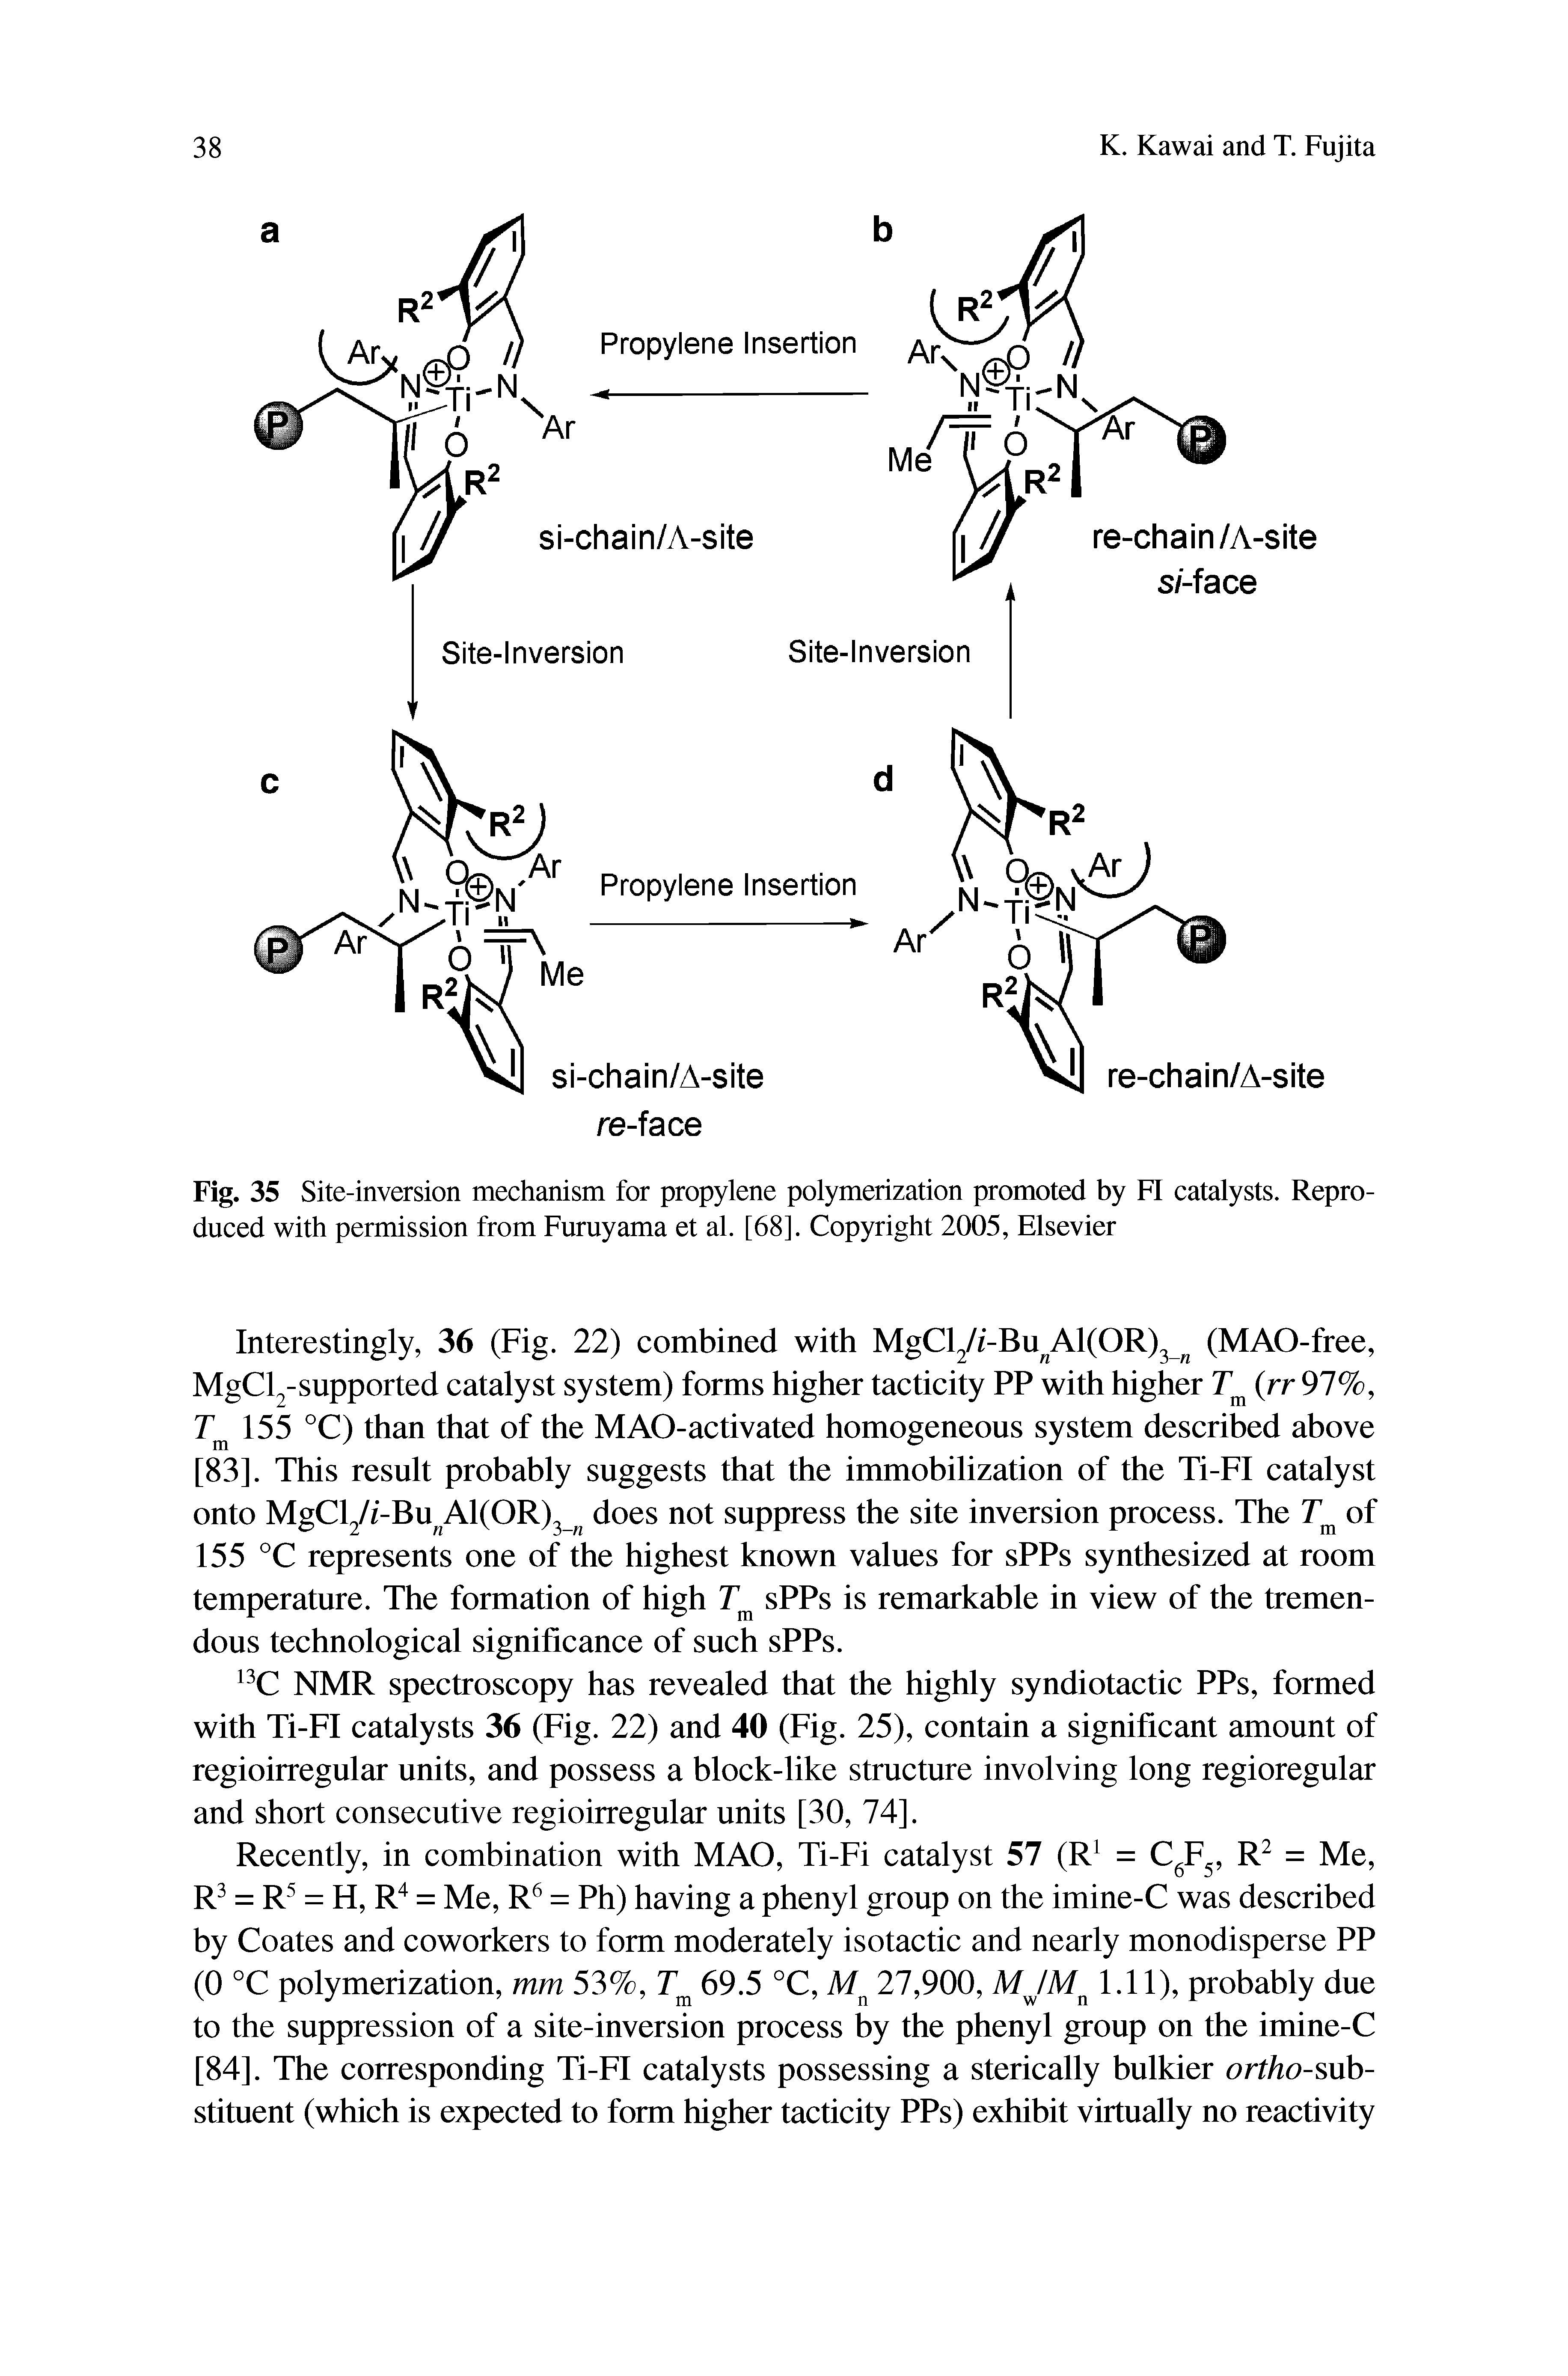 Fig. 35 Site-inversion mechanism for propylene polymerization promoted by FT catalysts. Reproduced with permission from Furuyama et al. [68]. Copyright 2005, Elsevier...